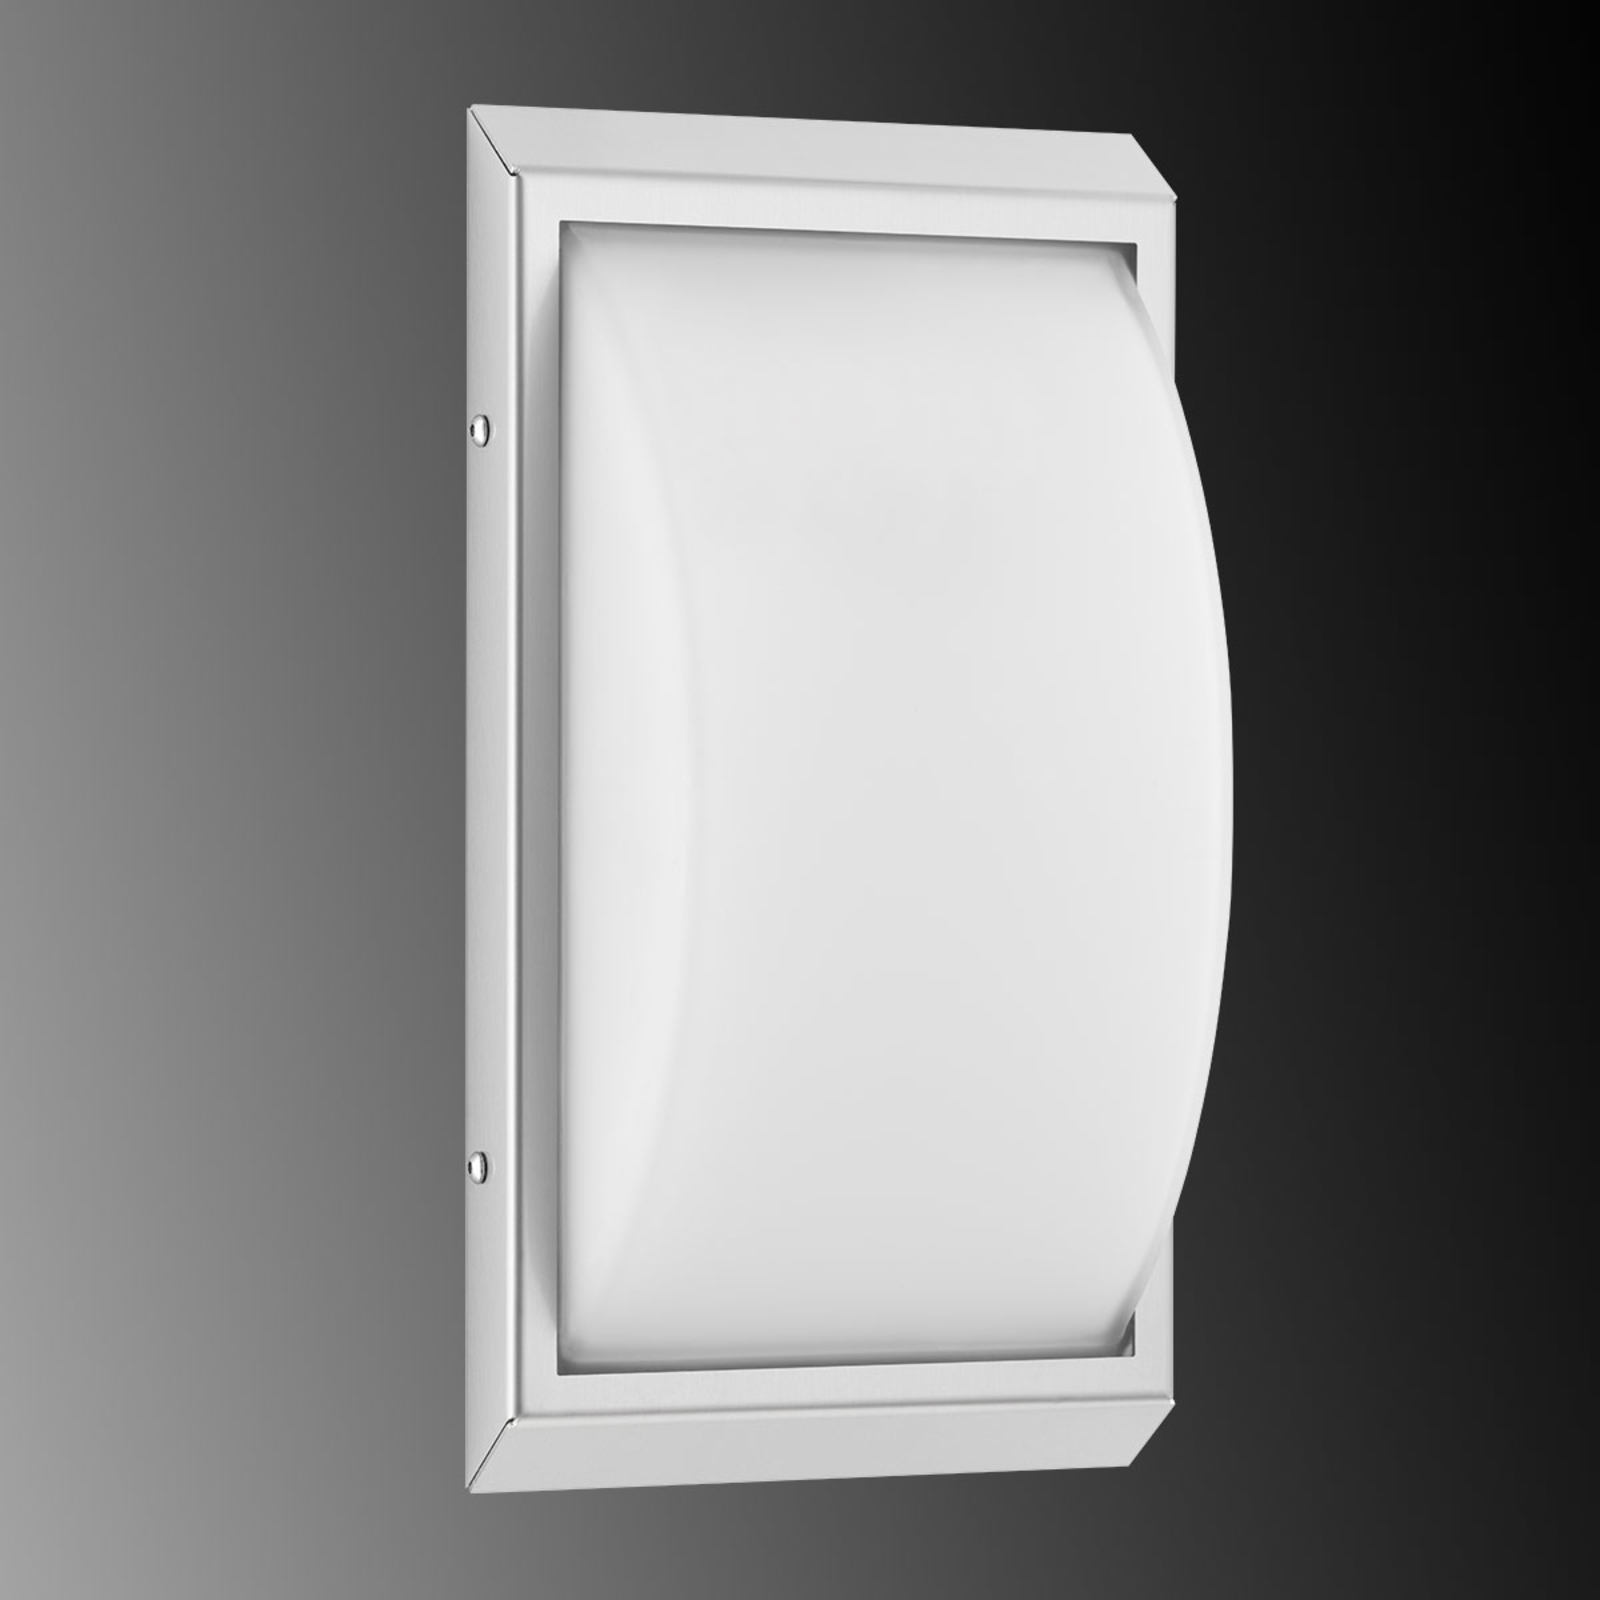 LED outdoor wall light 052, white